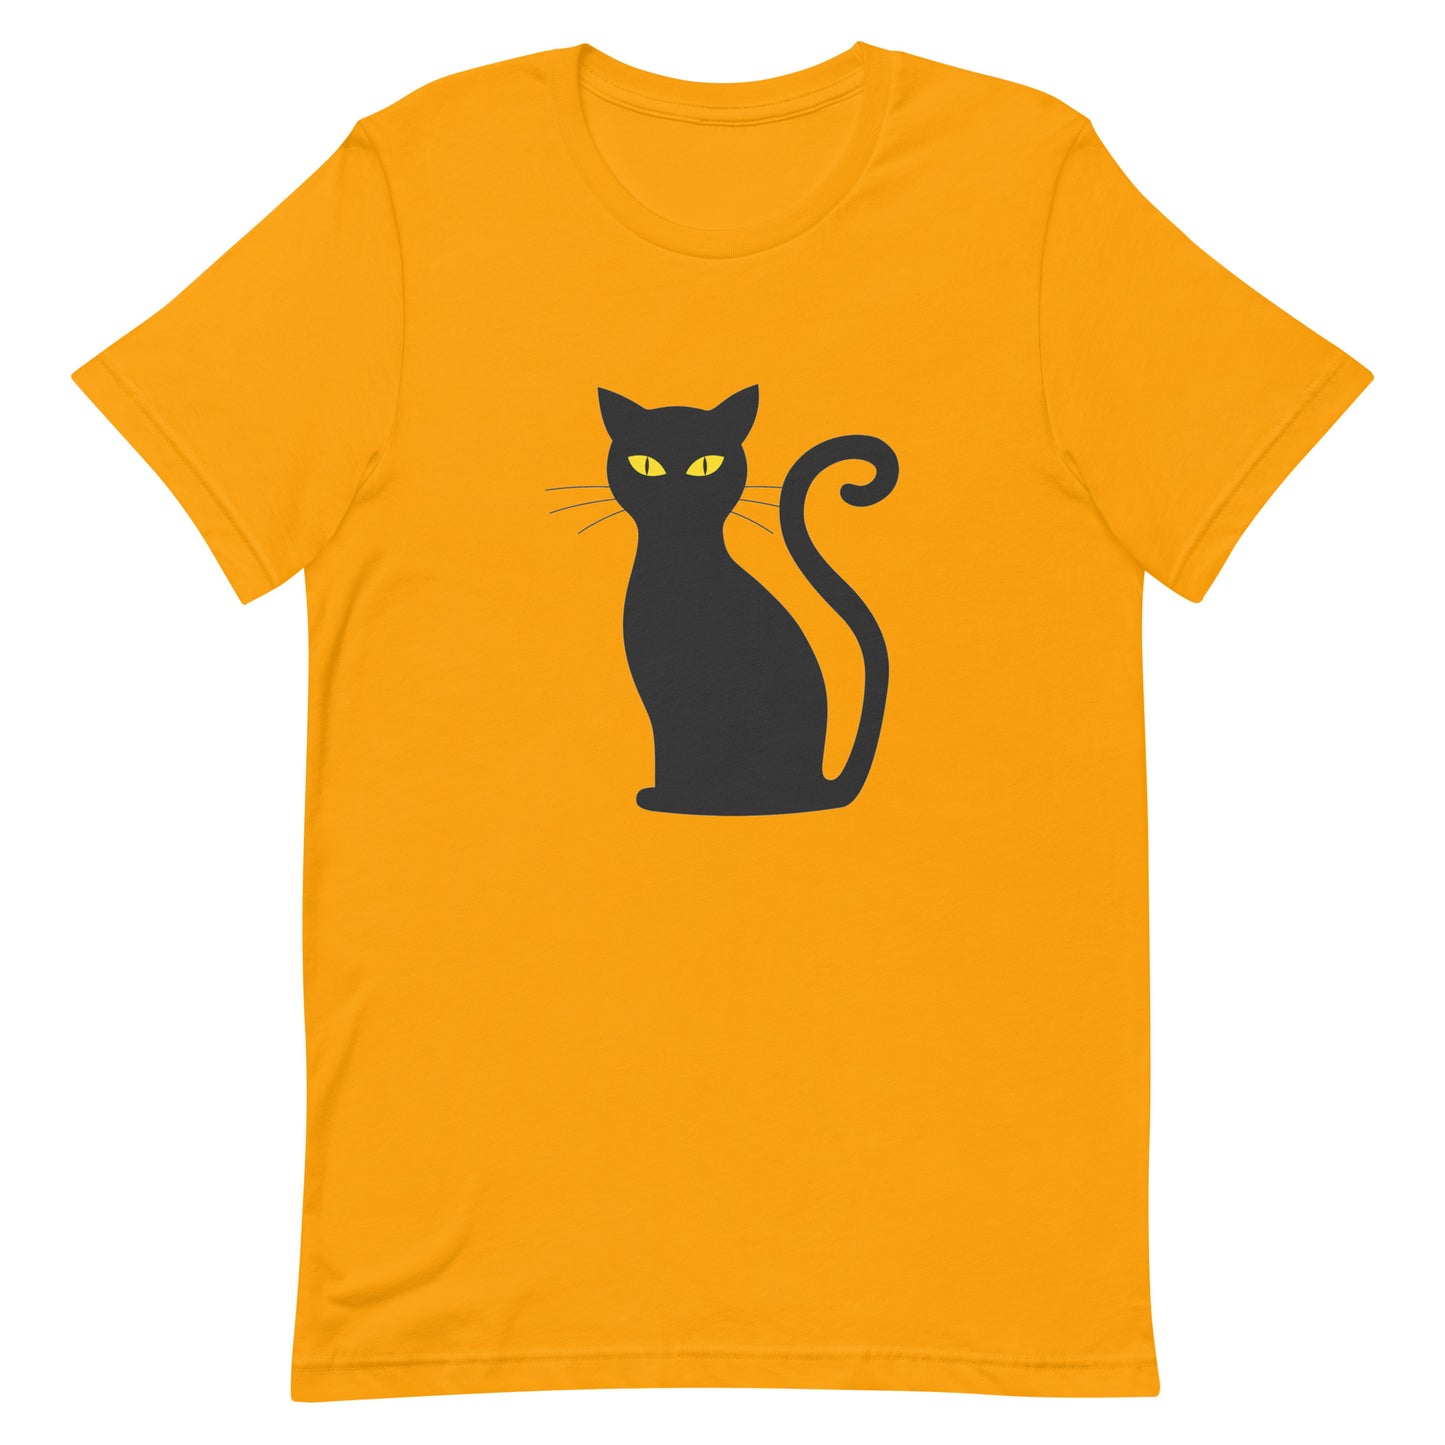 Women and Mens (Unisex) T-Shirt Printed with A Black Cat